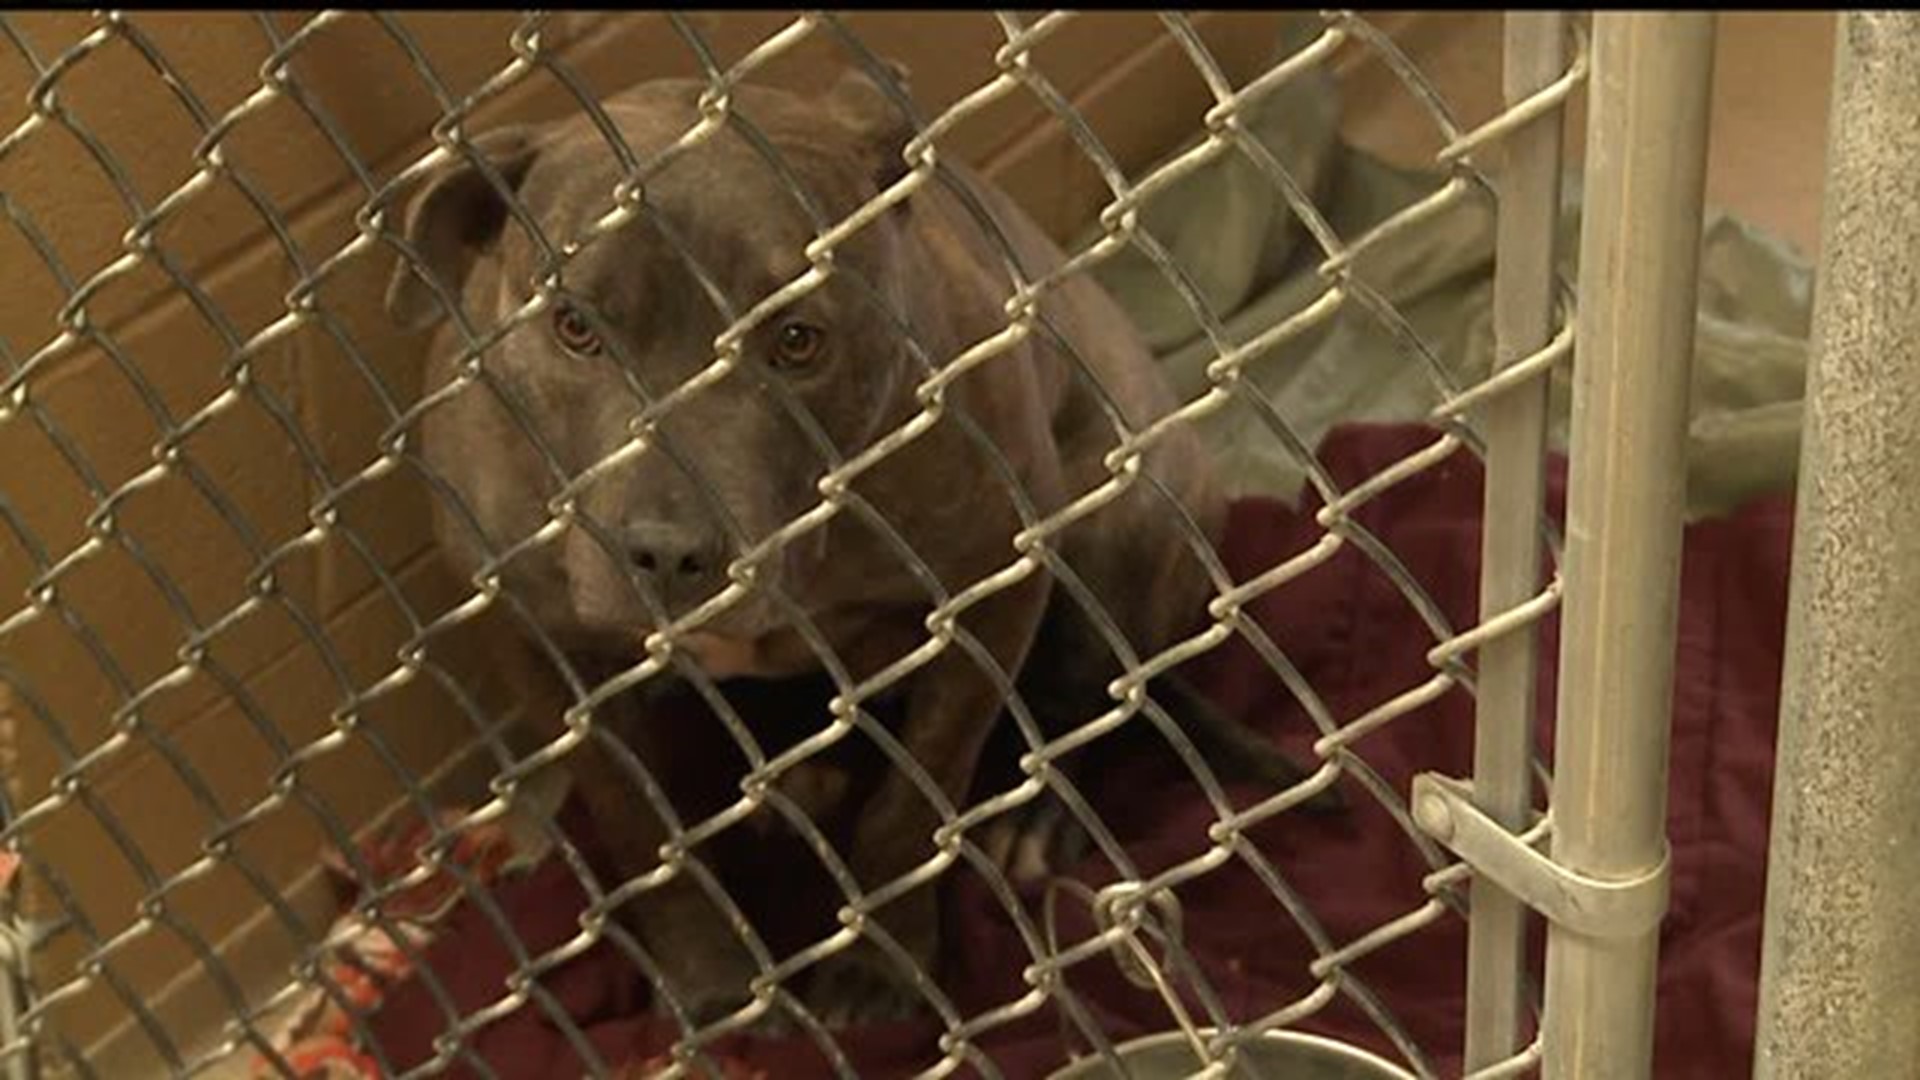 Humane Society of Harrisburg takes in animals from New Jersey